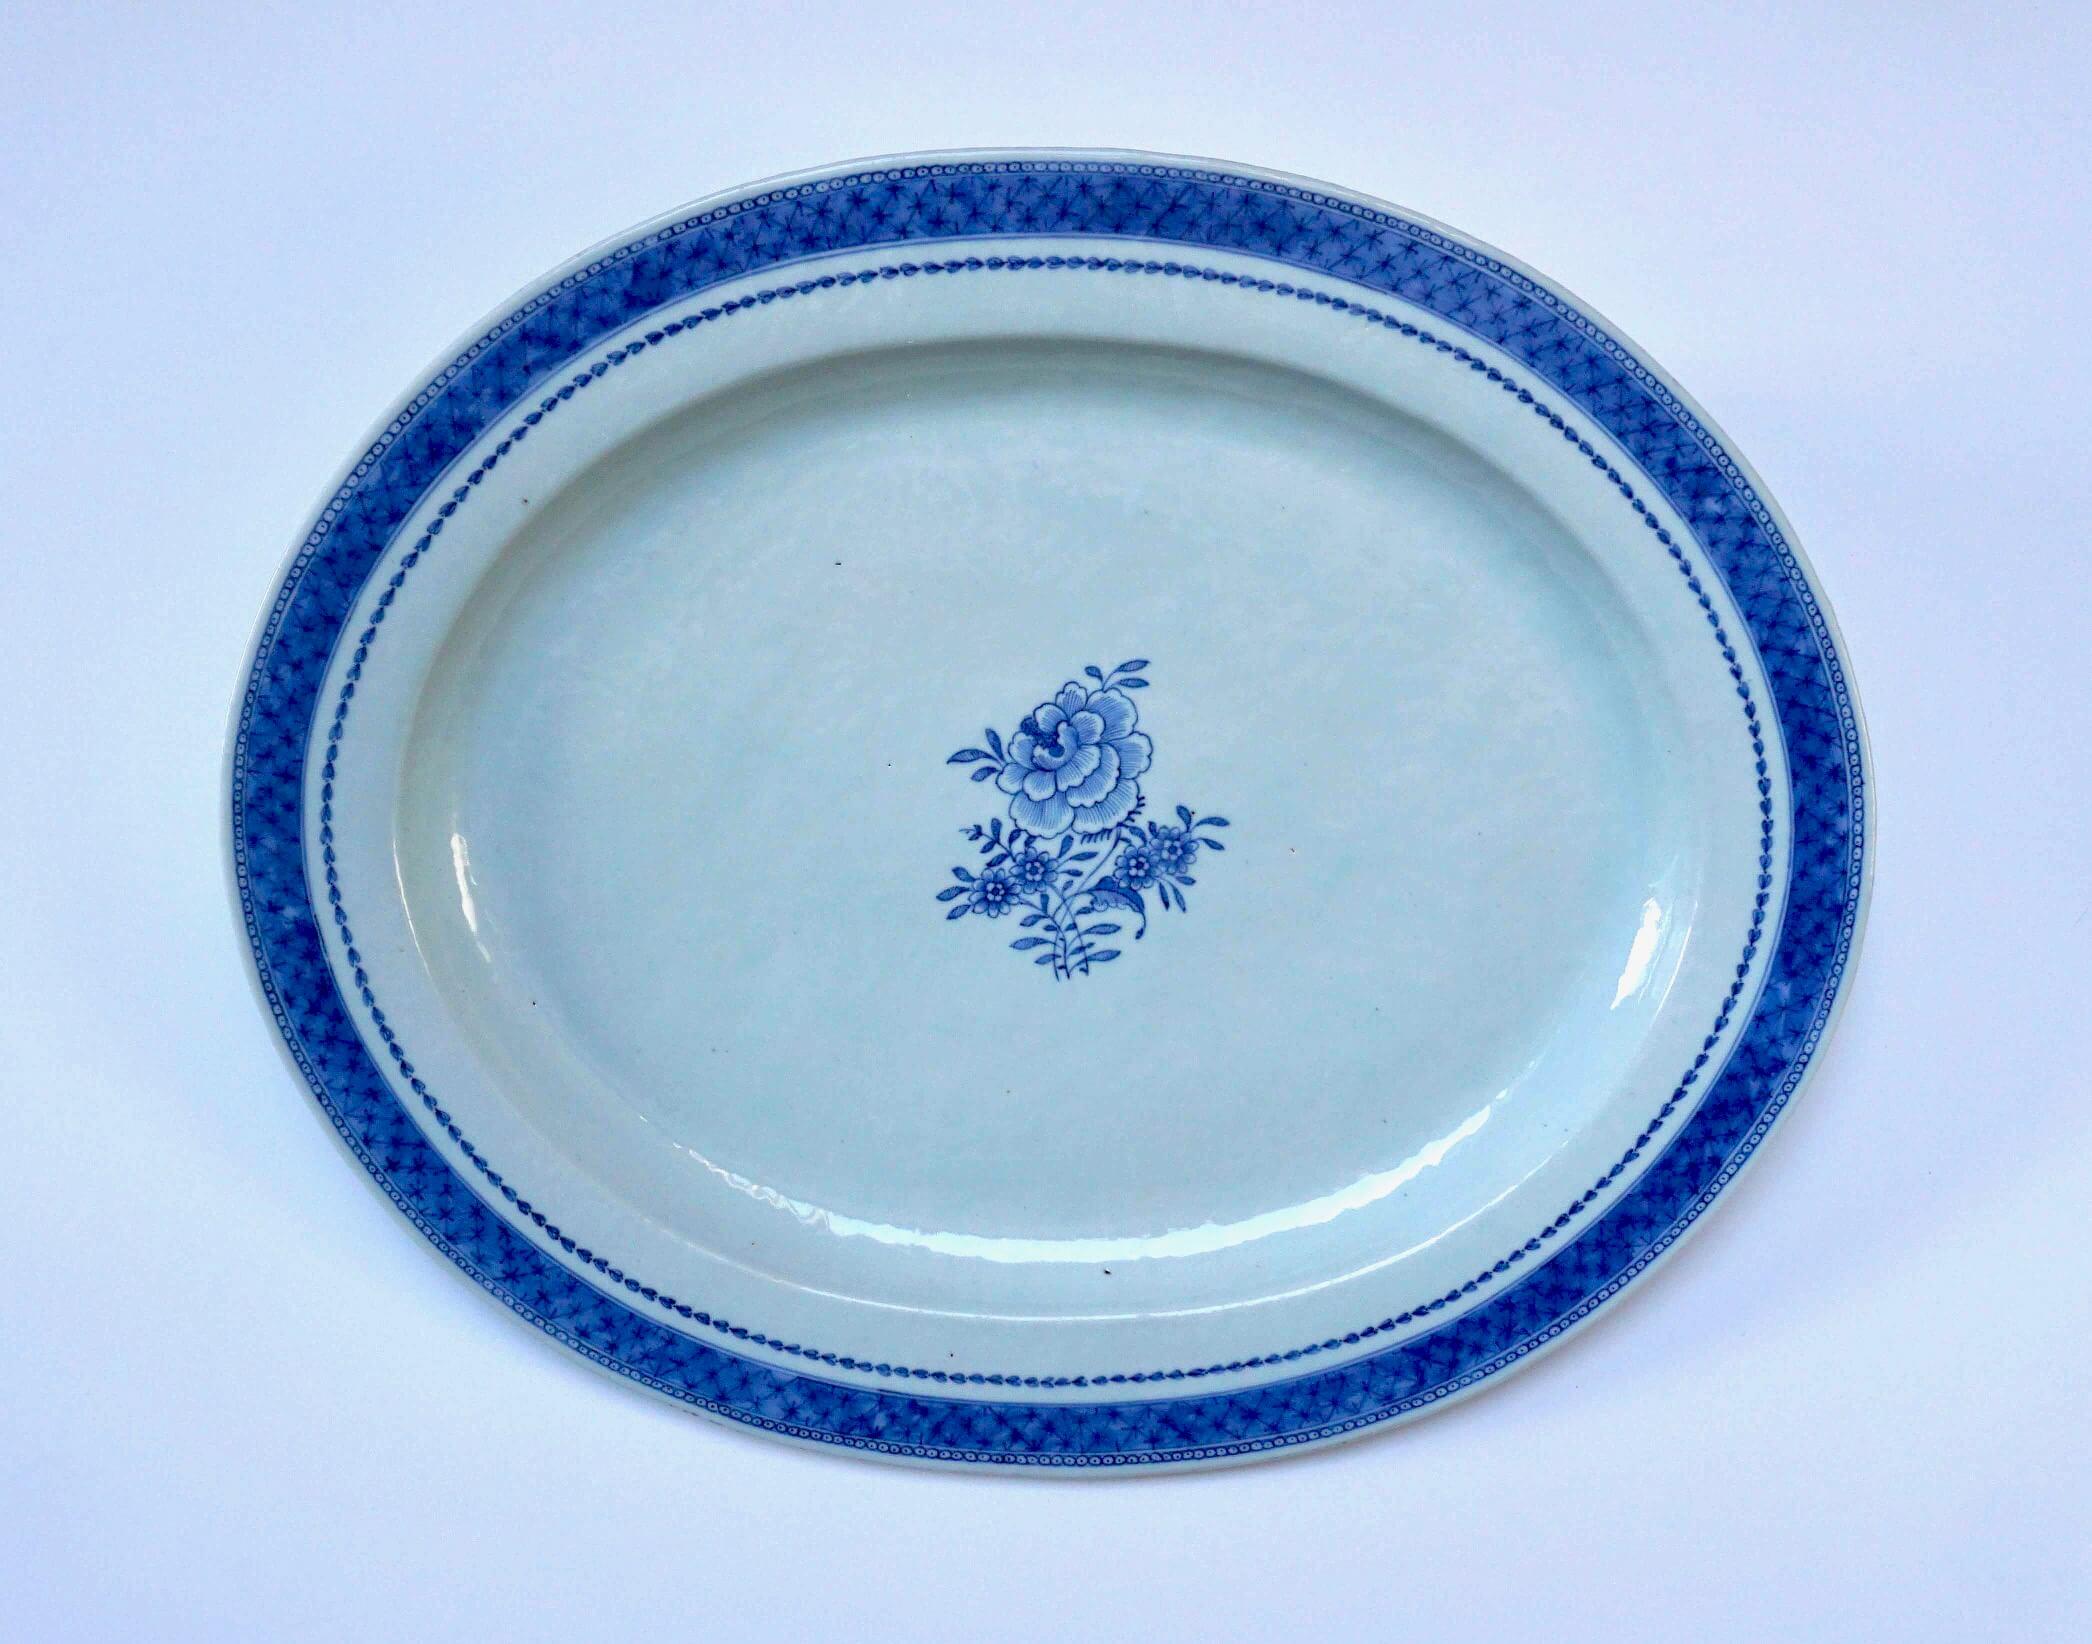 A rare circa 1790 Chinese export for the Swedish Gustavian period market porcelain platter of large oval form having underglaze blue 'Canton' compound border of pearls surrounding trellis with stars, and unique inner border of neoclassical